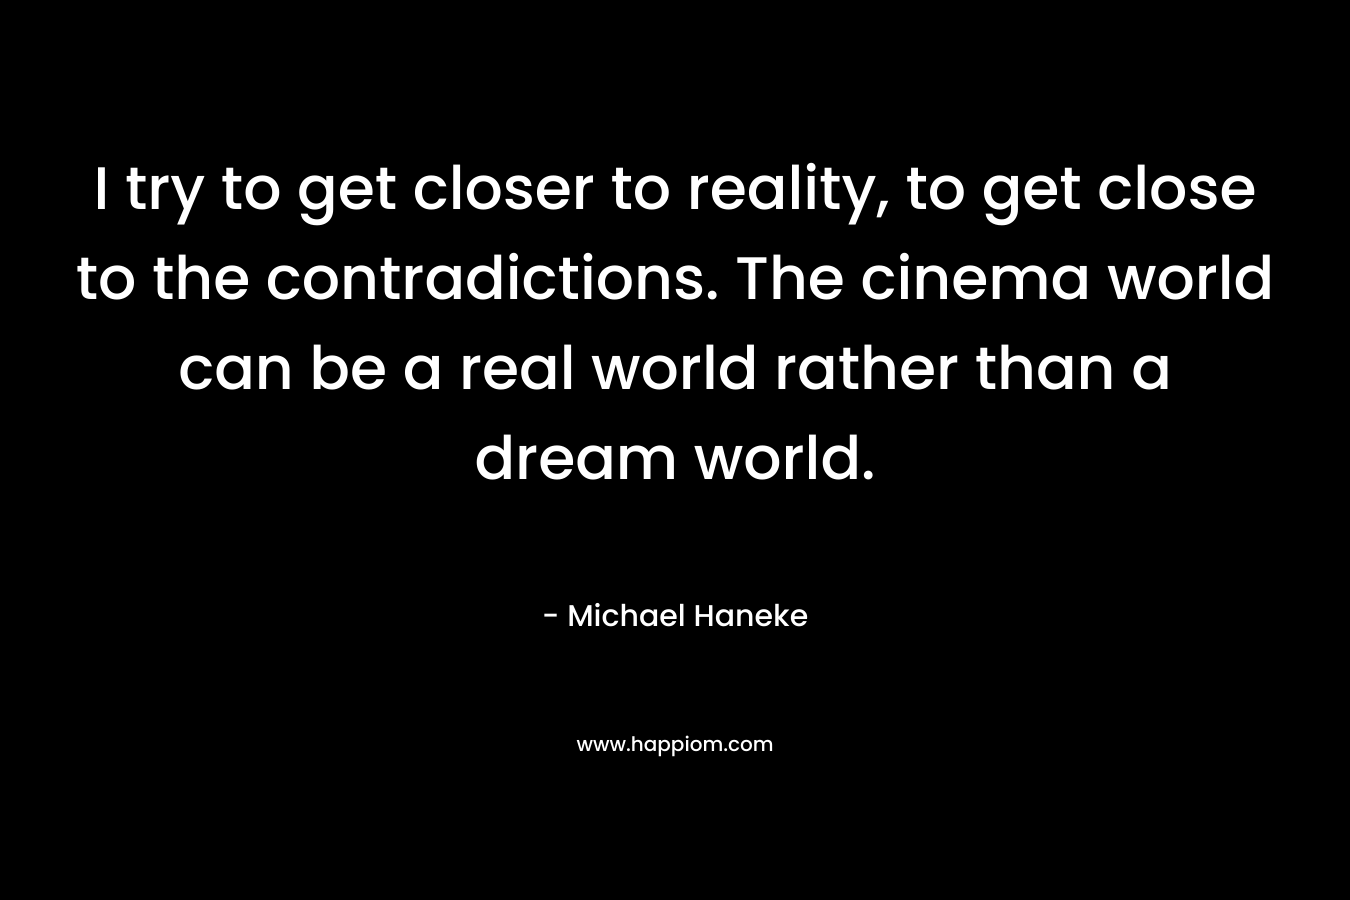 I try to get closer to reality, to get close to the contradictions. The cinema world can be a real world rather than a dream world. – Michael Haneke